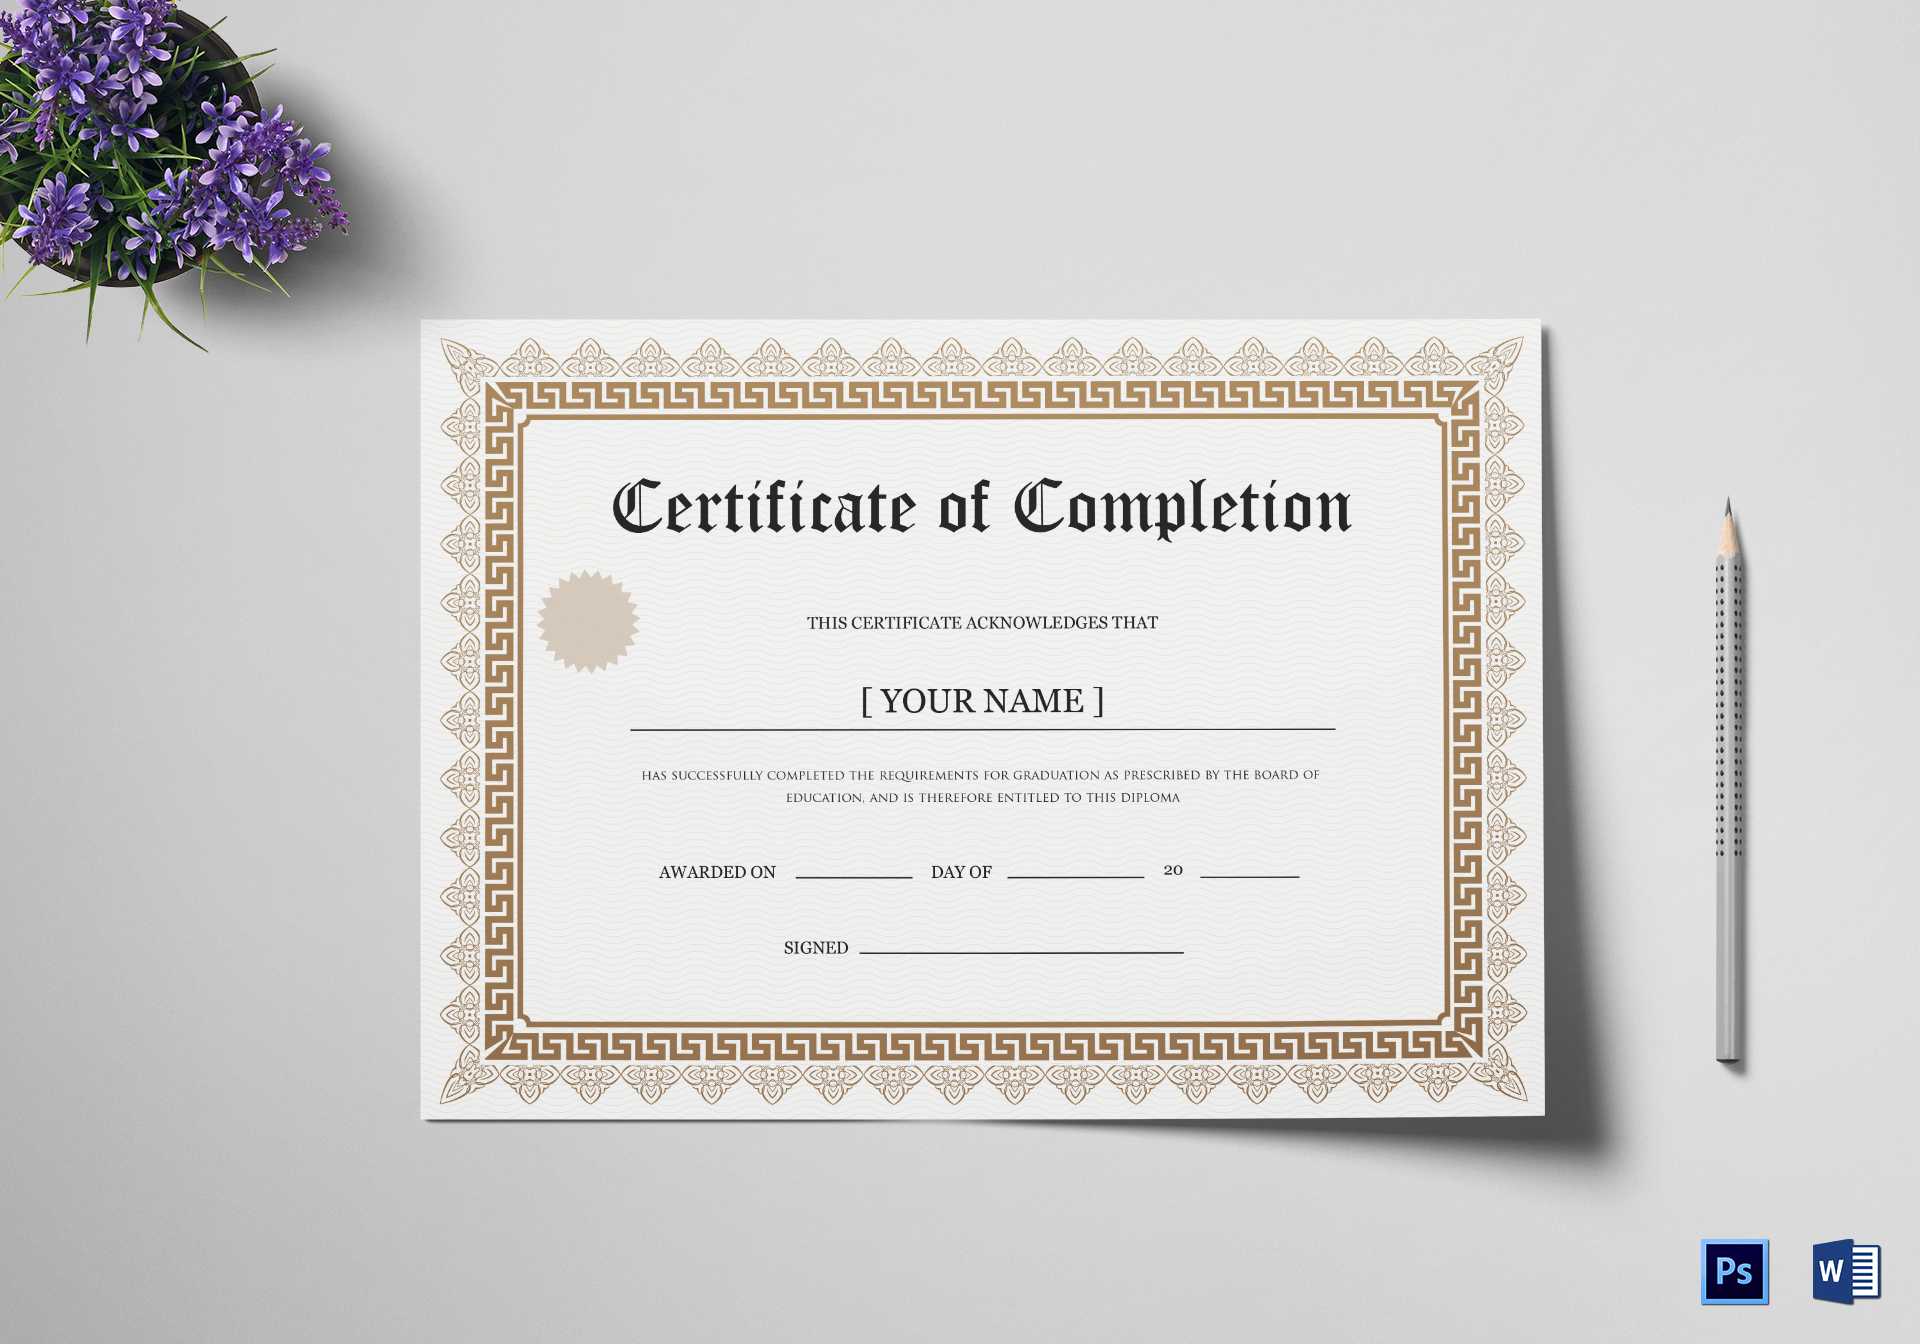 Bachelor Degree Completion Certificate Template With Graduation Certificate Template Word